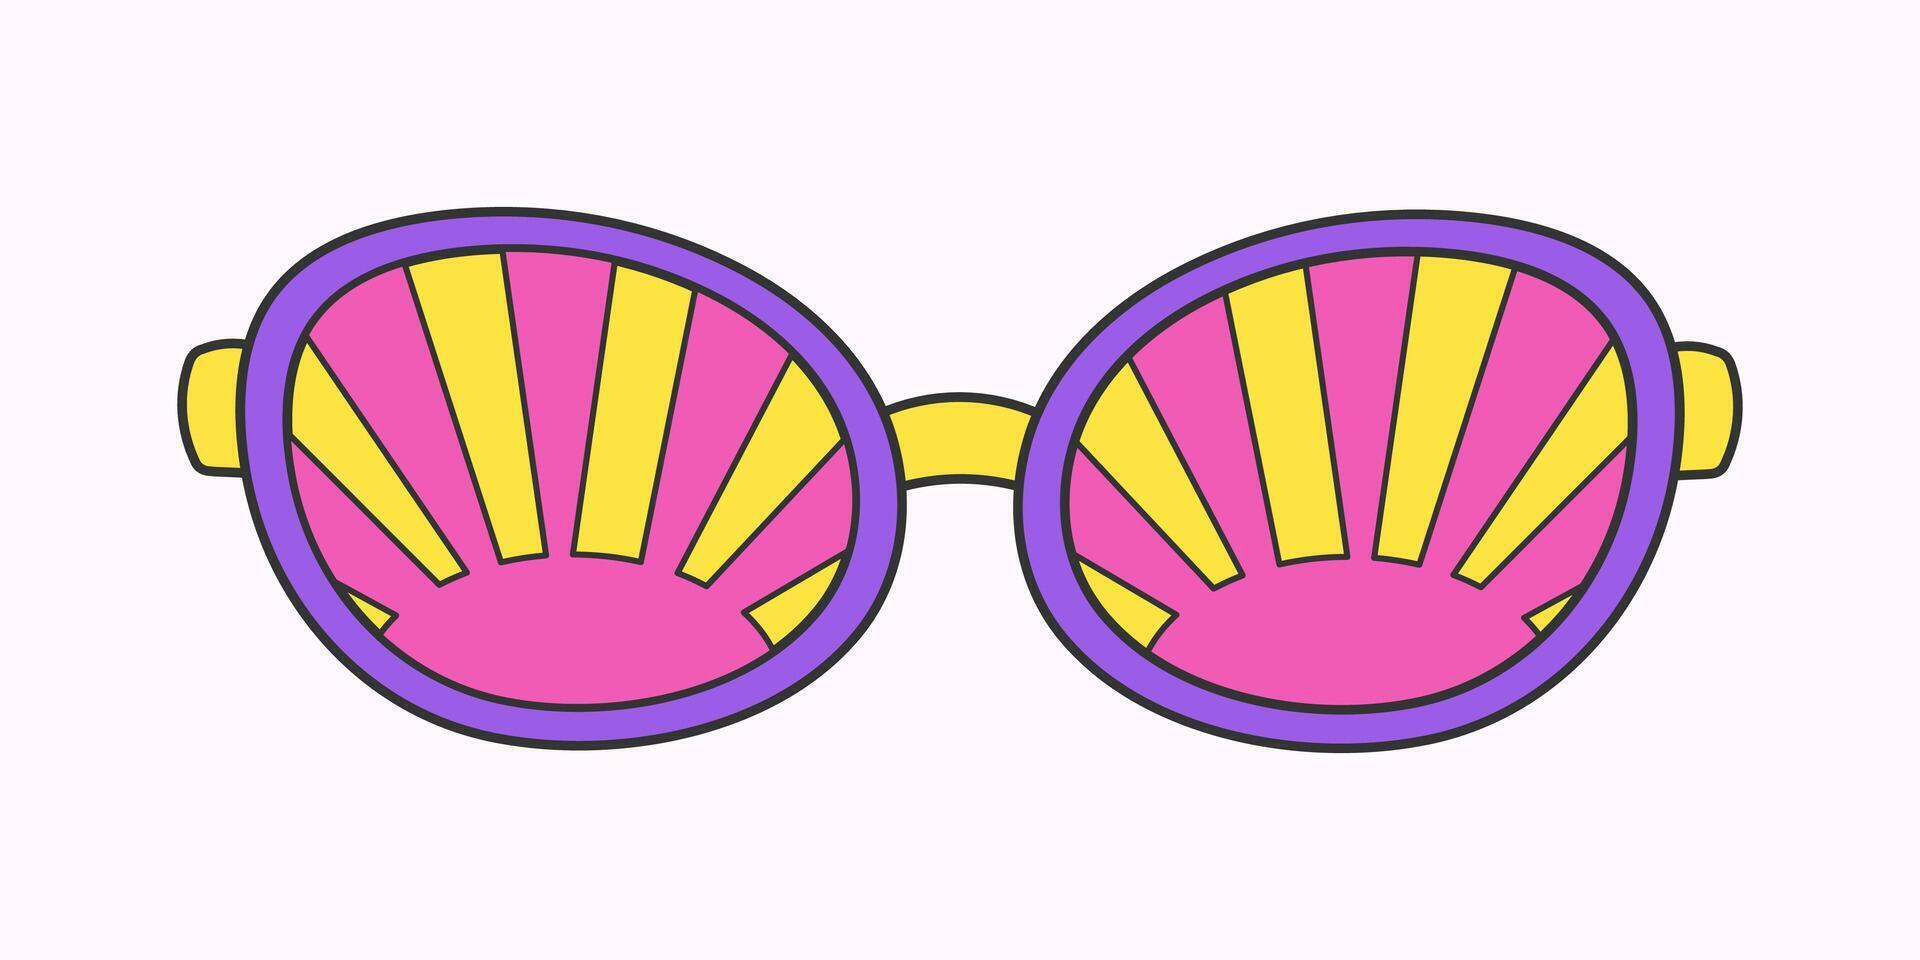 Retro hippie psychedelic style sunglasses. Geometric abstract vector glasses isolated on white background, 70s groovy fashion. Doodle sun pattern for printing on T-shirts, cards.